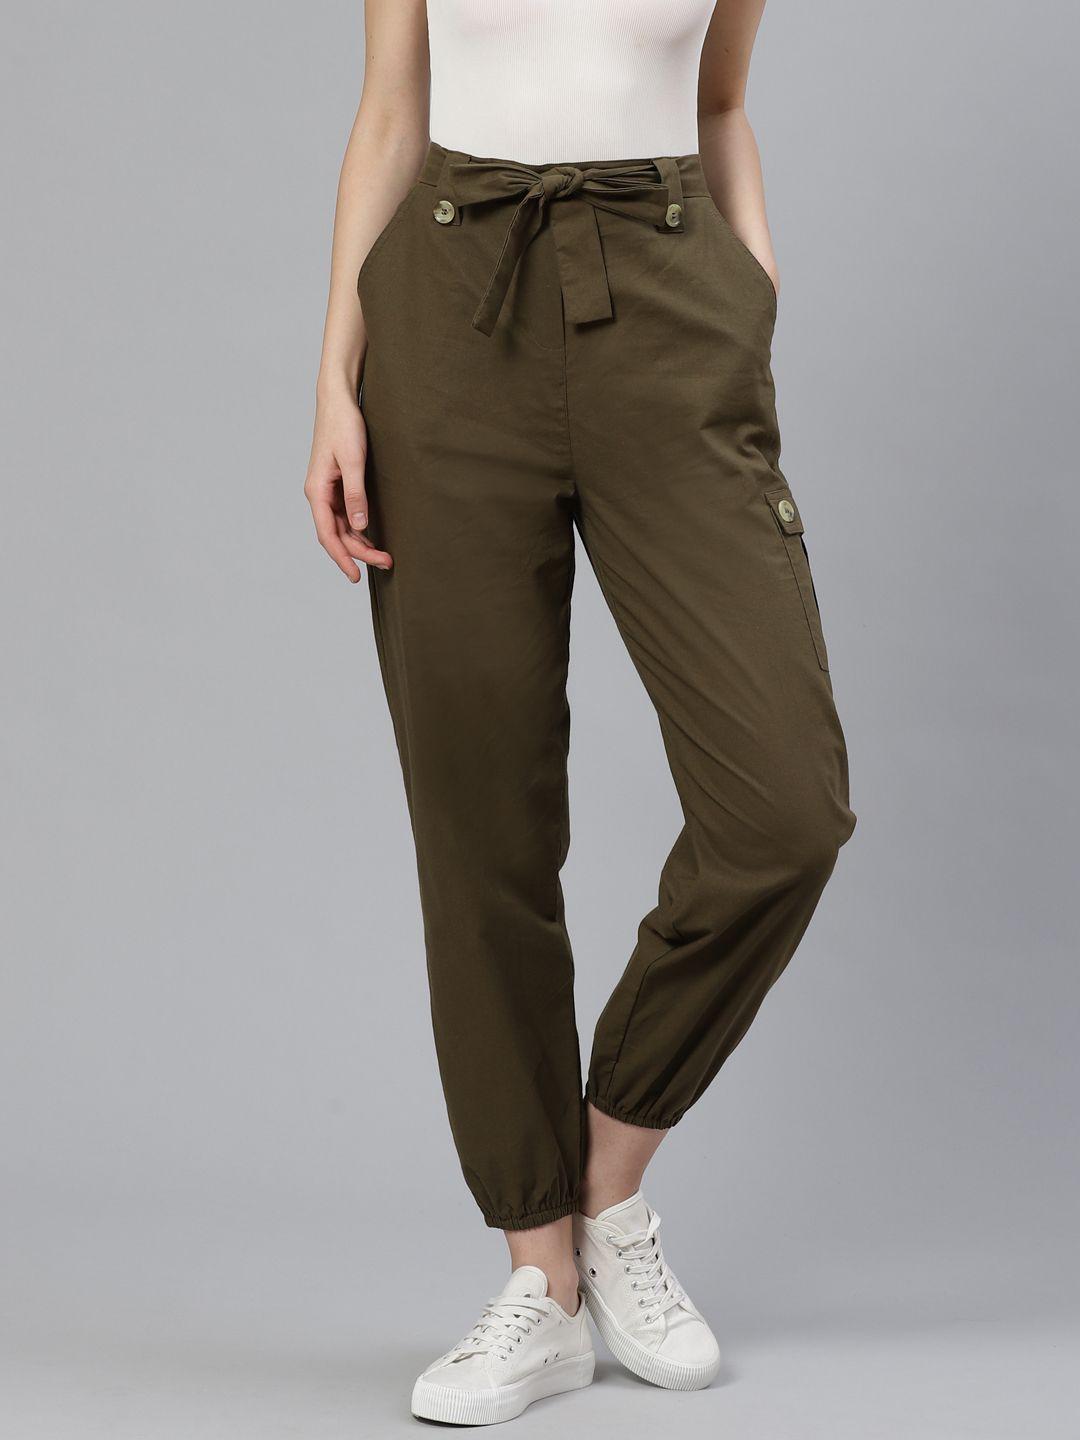 orchid-hues-women-olive-green-loose-fit-pure-cotton-joggers